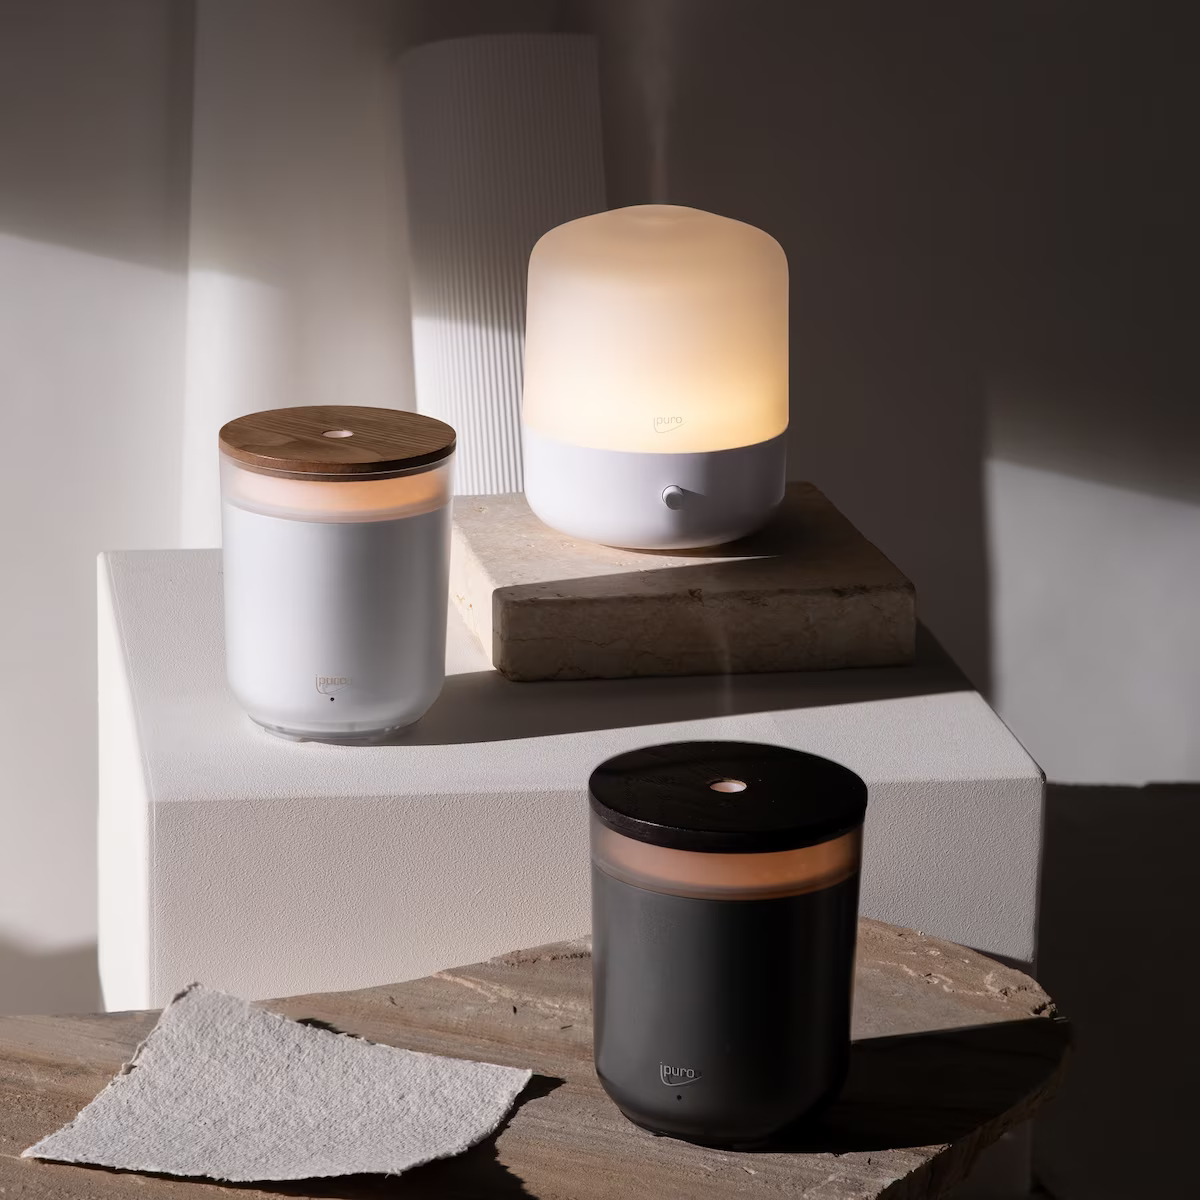 https://www.ipuroshop.ch/images/product_images/original_images/ipuro-air-sonic-candle-5.jpg